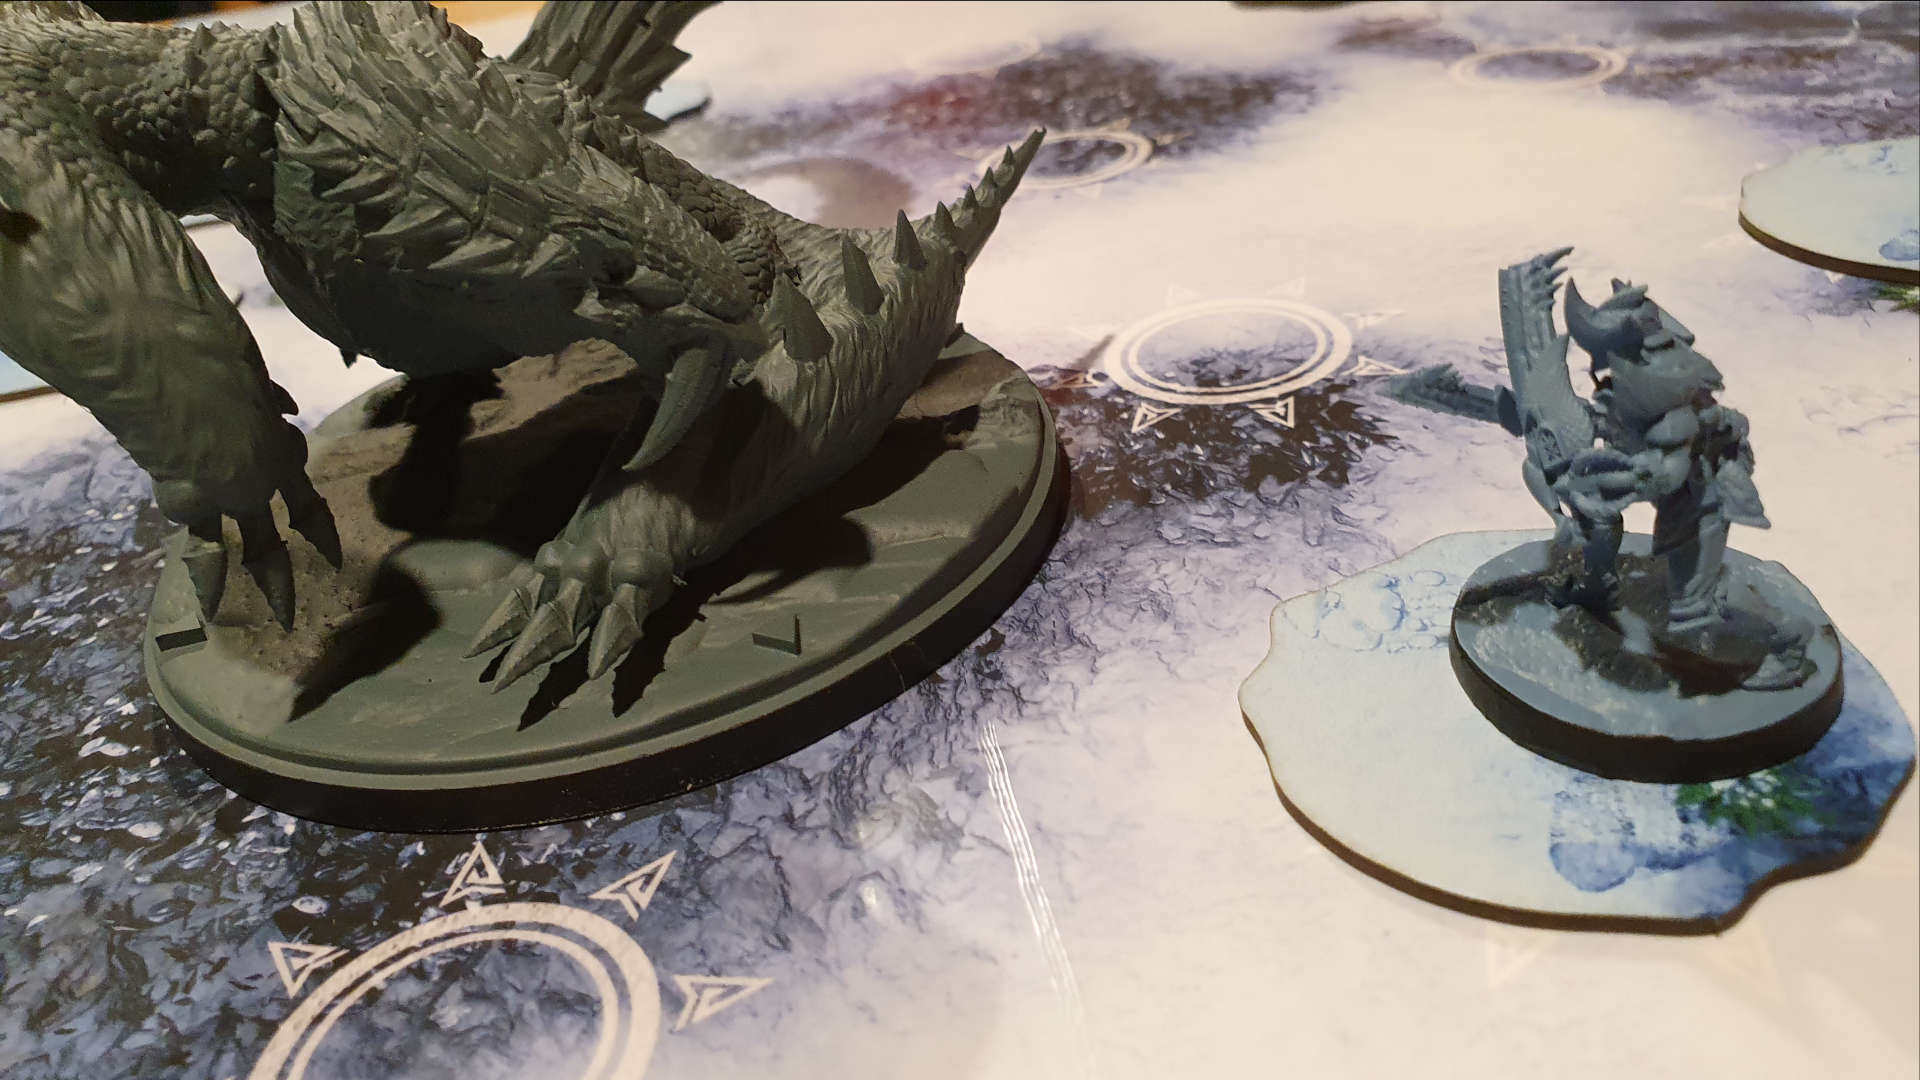 Our hands-on with the Monster Hunter World Iceborne board game